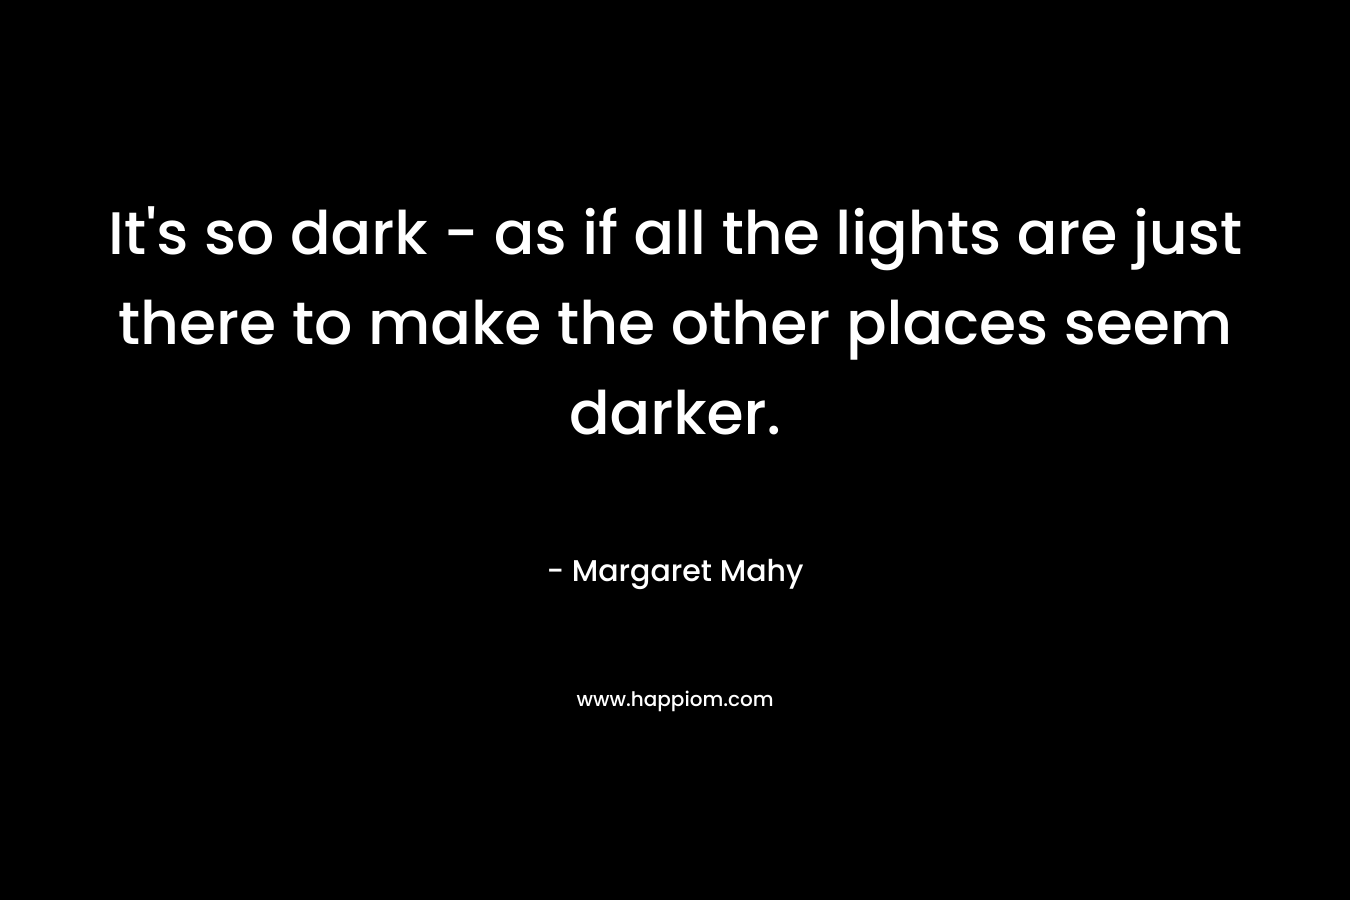 It’s so dark – as if all the lights are just there to make the other places seem darker. – Margaret Mahy